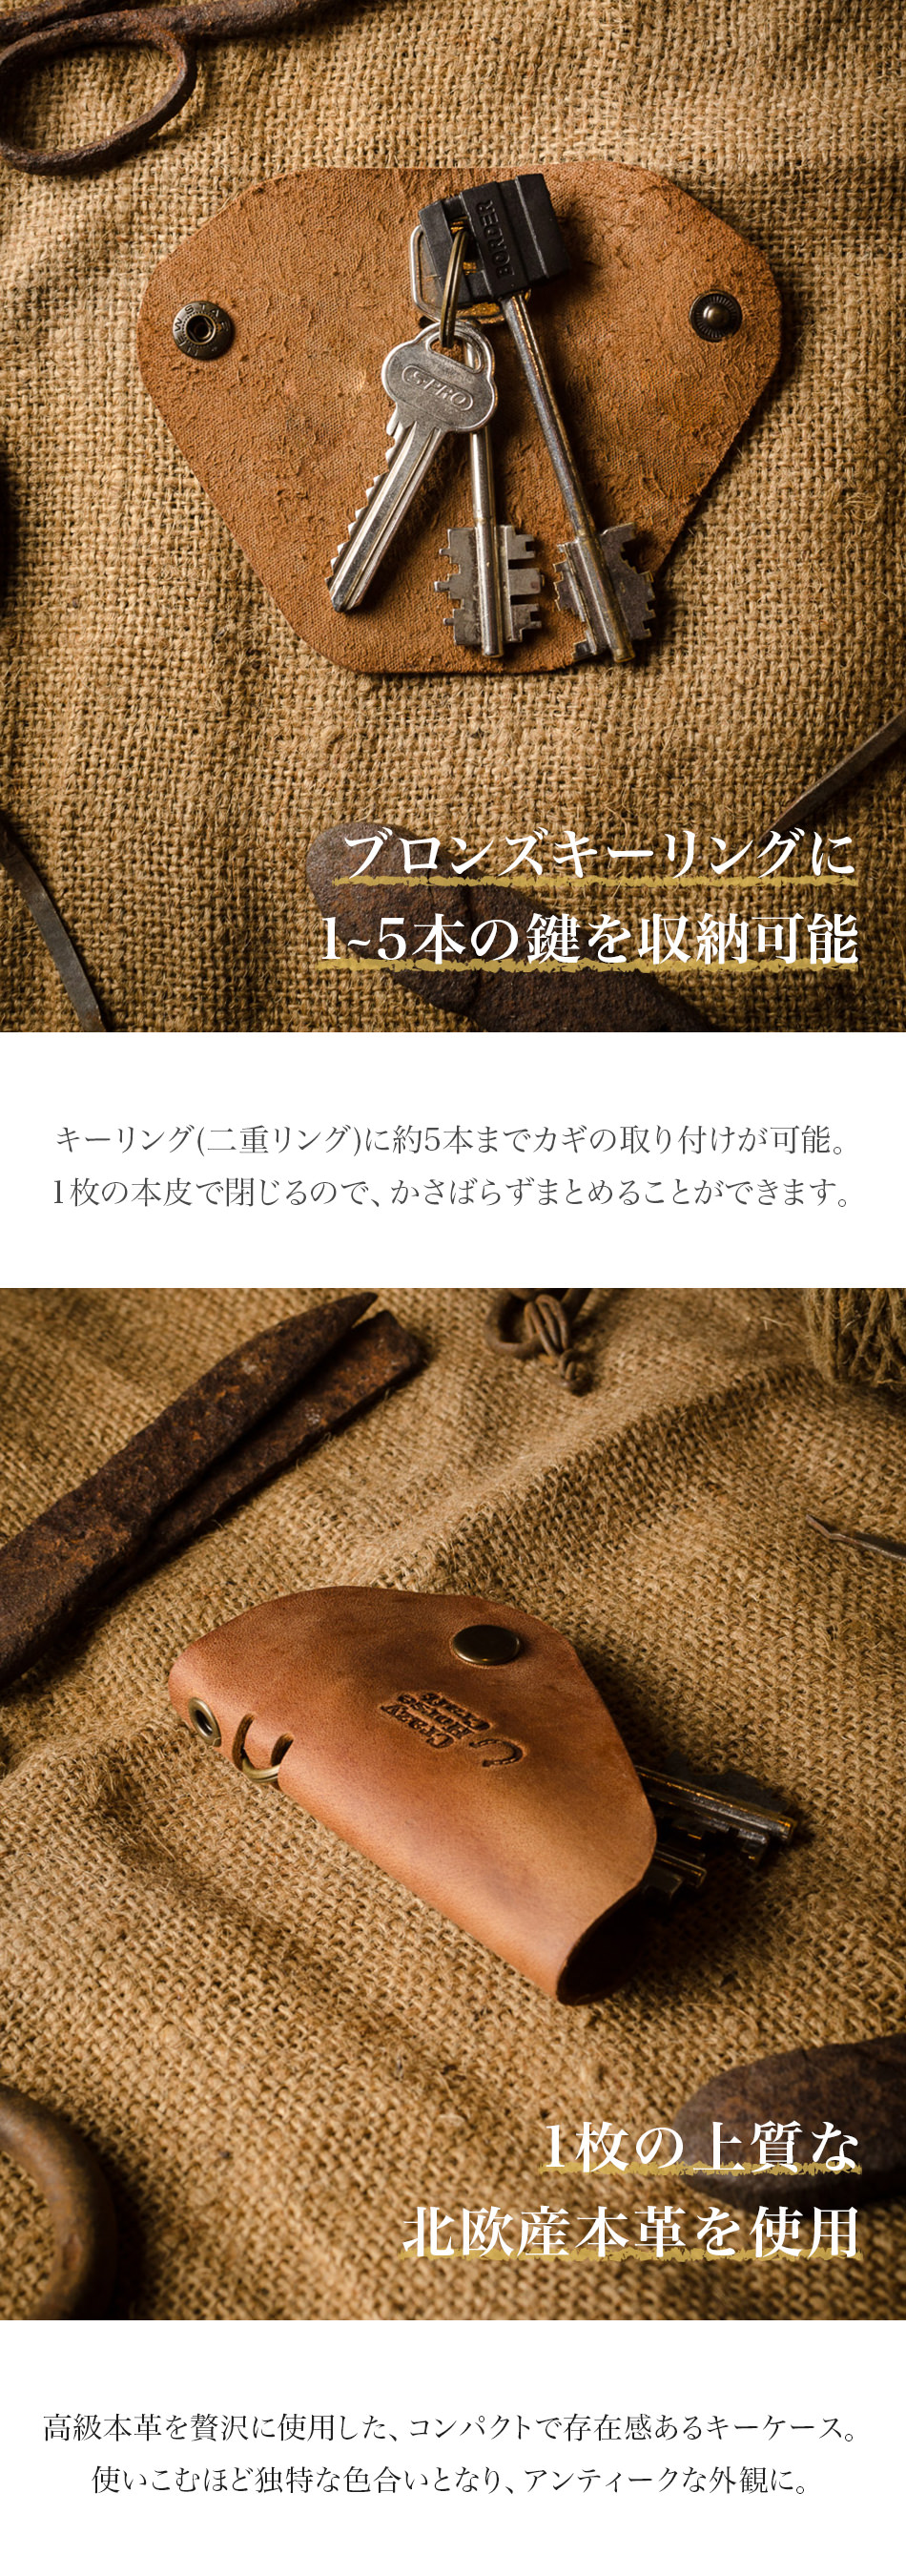 Leather Key Holder for キーケース｜北欧リトアニアブランド Crazy Horse Craft